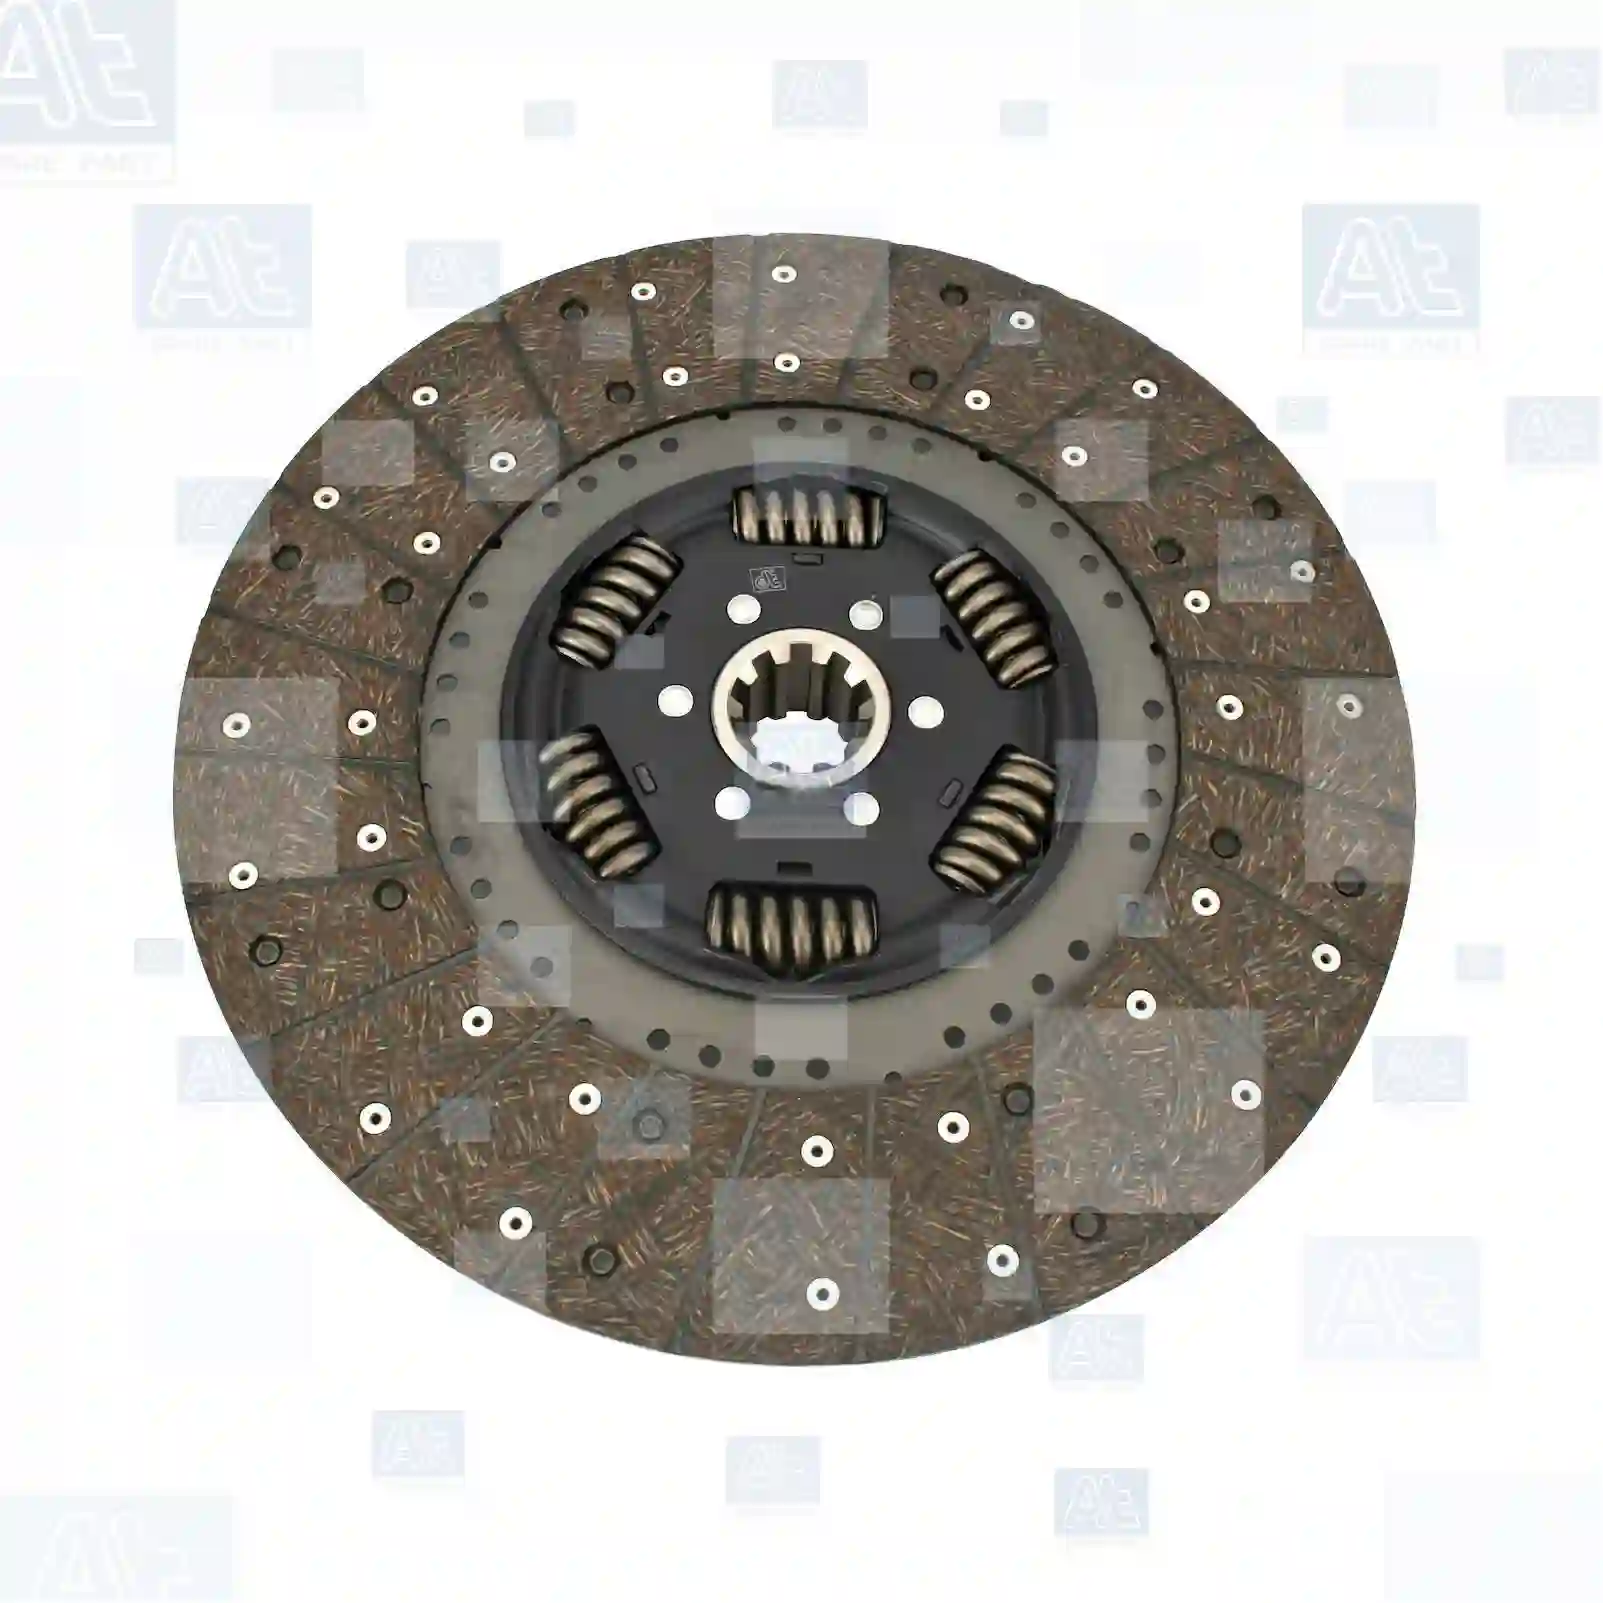 Clutch disc, at no 77721902, oem no: 81303010433, 51303010006, 81303010378, 81303010379, 81303010433, 81303010480, 81303010481, 81303010516, 81303010517, 81303010524, 81303010557, 81303010558, 81303010580, 81303010587, 81303010601, 81303010615, 81303019378, 81303019379, 81303019481, 81303019516, 81303019557, 81303019558, 0011010004, 011010004, 81303010378, 5654556 At Spare Part | Engine, Accelerator Pedal, Camshaft, Connecting Rod, Crankcase, Crankshaft, Cylinder Head, Engine Suspension Mountings, Exhaust Manifold, Exhaust Gas Recirculation, Filter Kits, Flywheel Housing, General Overhaul Kits, Engine, Intake Manifold, Oil Cleaner, Oil Cooler, Oil Filter, Oil Pump, Oil Sump, Piston & Liner, Sensor & Switch, Timing Case, Turbocharger, Cooling System, Belt Tensioner, Coolant Filter, Coolant Pipe, Corrosion Prevention Agent, Drive, Expansion Tank, Fan, Intercooler, Monitors & Gauges, Radiator, Thermostat, V-Belt / Timing belt, Water Pump, Fuel System, Electronical Injector Unit, Feed Pump, Fuel Filter, cpl., Fuel Gauge Sender,  Fuel Line, Fuel Pump, Fuel Tank, Injection Line Kit, Injection Pump, Exhaust System, Clutch & Pedal, Gearbox, Propeller Shaft, Axles, Brake System, Hubs & Wheels, Suspension, Leaf Spring, Universal Parts / Accessories, Steering, Electrical System, Cabin Clutch disc, at no 77721902, oem no: 81303010433, 51303010006, 81303010378, 81303010379, 81303010433, 81303010480, 81303010481, 81303010516, 81303010517, 81303010524, 81303010557, 81303010558, 81303010580, 81303010587, 81303010601, 81303010615, 81303019378, 81303019379, 81303019481, 81303019516, 81303019557, 81303019558, 0011010004, 011010004, 81303010378, 5654556 At Spare Part | Engine, Accelerator Pedal, Camshaft, Connecting Rod, Crankcase, Crankshaft, Cylinder Head, Engine Suspension Mountings, Exhaust Manifold, Exhaust Gas Recirculation, Filter Kits, Flywheel Housing, General Overhaul Kits, Engine, Intake Manifold, Oil Cleaner, Oil Cooler, Oil Filter, Oil Pump, Oil Sump, Piston & Liner, Sensor & Switch, Timing Case, Turbocharger, Cooling System, Belt Tensioner, Coolant Filter, Coolant Pipe, Corrosion Prevention Agent, Drive, Expansion Tank, Fan, Intercooler, Monitors & Gauges, Radiator, Thermostat, V-Belt / Timing belt, Water Pump, Fuel System, Electronical Injector Unit, Feed Pump, Fuel Filter, cpl., Fuel Gauge Sender,  Fuel Line, Fuel Pump, Fuel Tank, Injection Line Kit, Injection Pump, Exhaust System, Clutch & Pedal, Gearbox, Propeller Shaft, Axles, Brake System, Hubs & Wheels, Suspension, Leaf Spring, Universal Parts / Accessories, Steering, Electrical System, Cabin